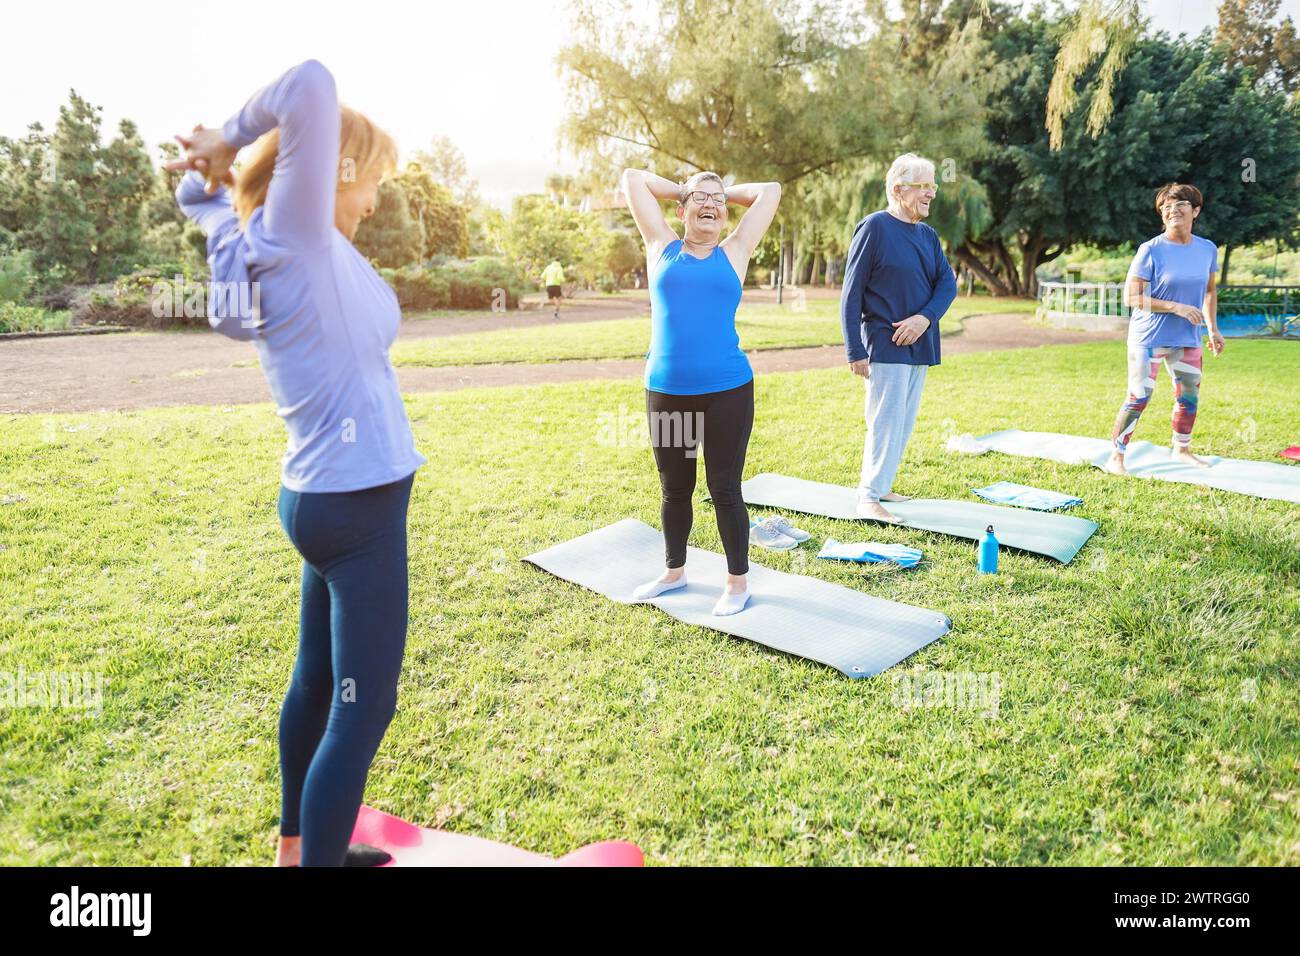 Multiracial senior people doing workout exercises outdoor with city park in background - Healthy and joyful elderly lifestyle concept - Focu Stock Photo